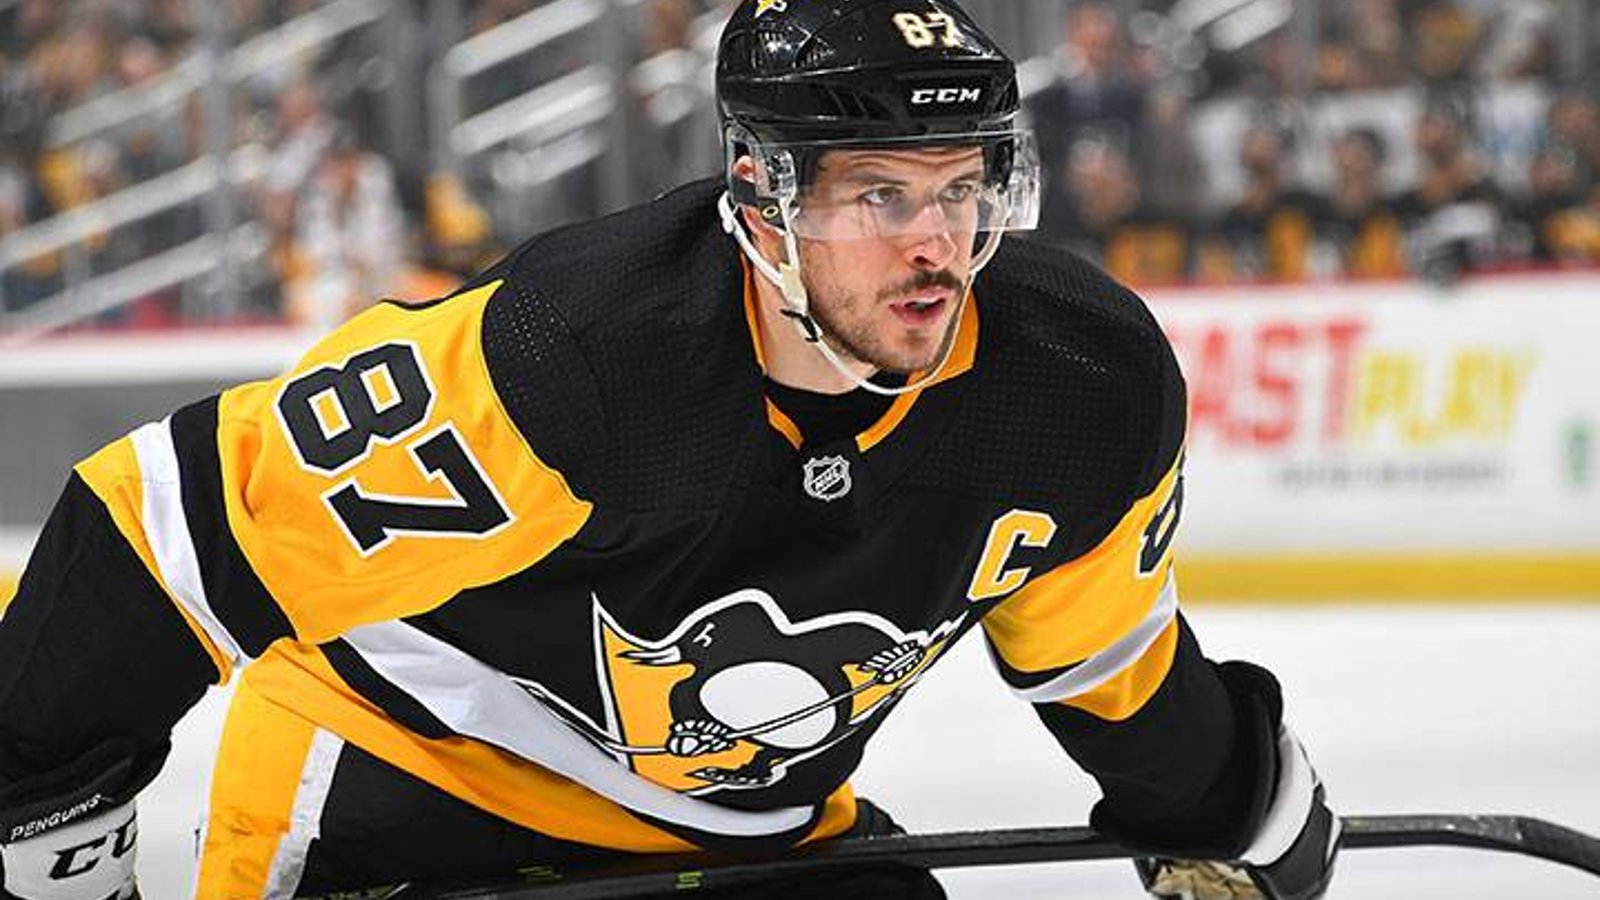 Breaking: Crosby confirms he will return tonight! 